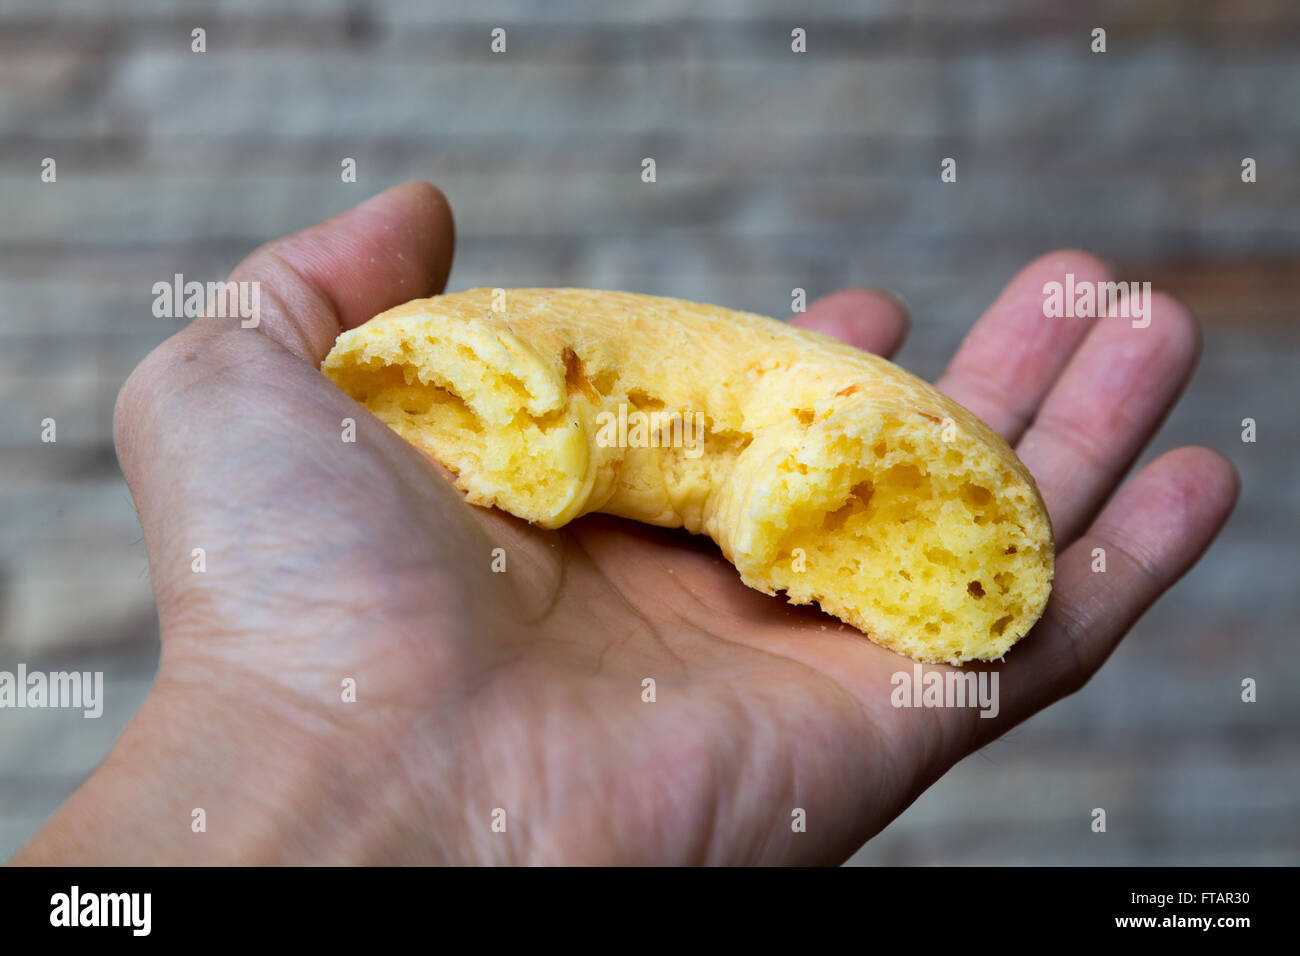 Hand holding typical Paraguayan chipa. Chipa is a type of baked, cheese-flavored rolls, a traditional snack and breakfast food Stock Photo